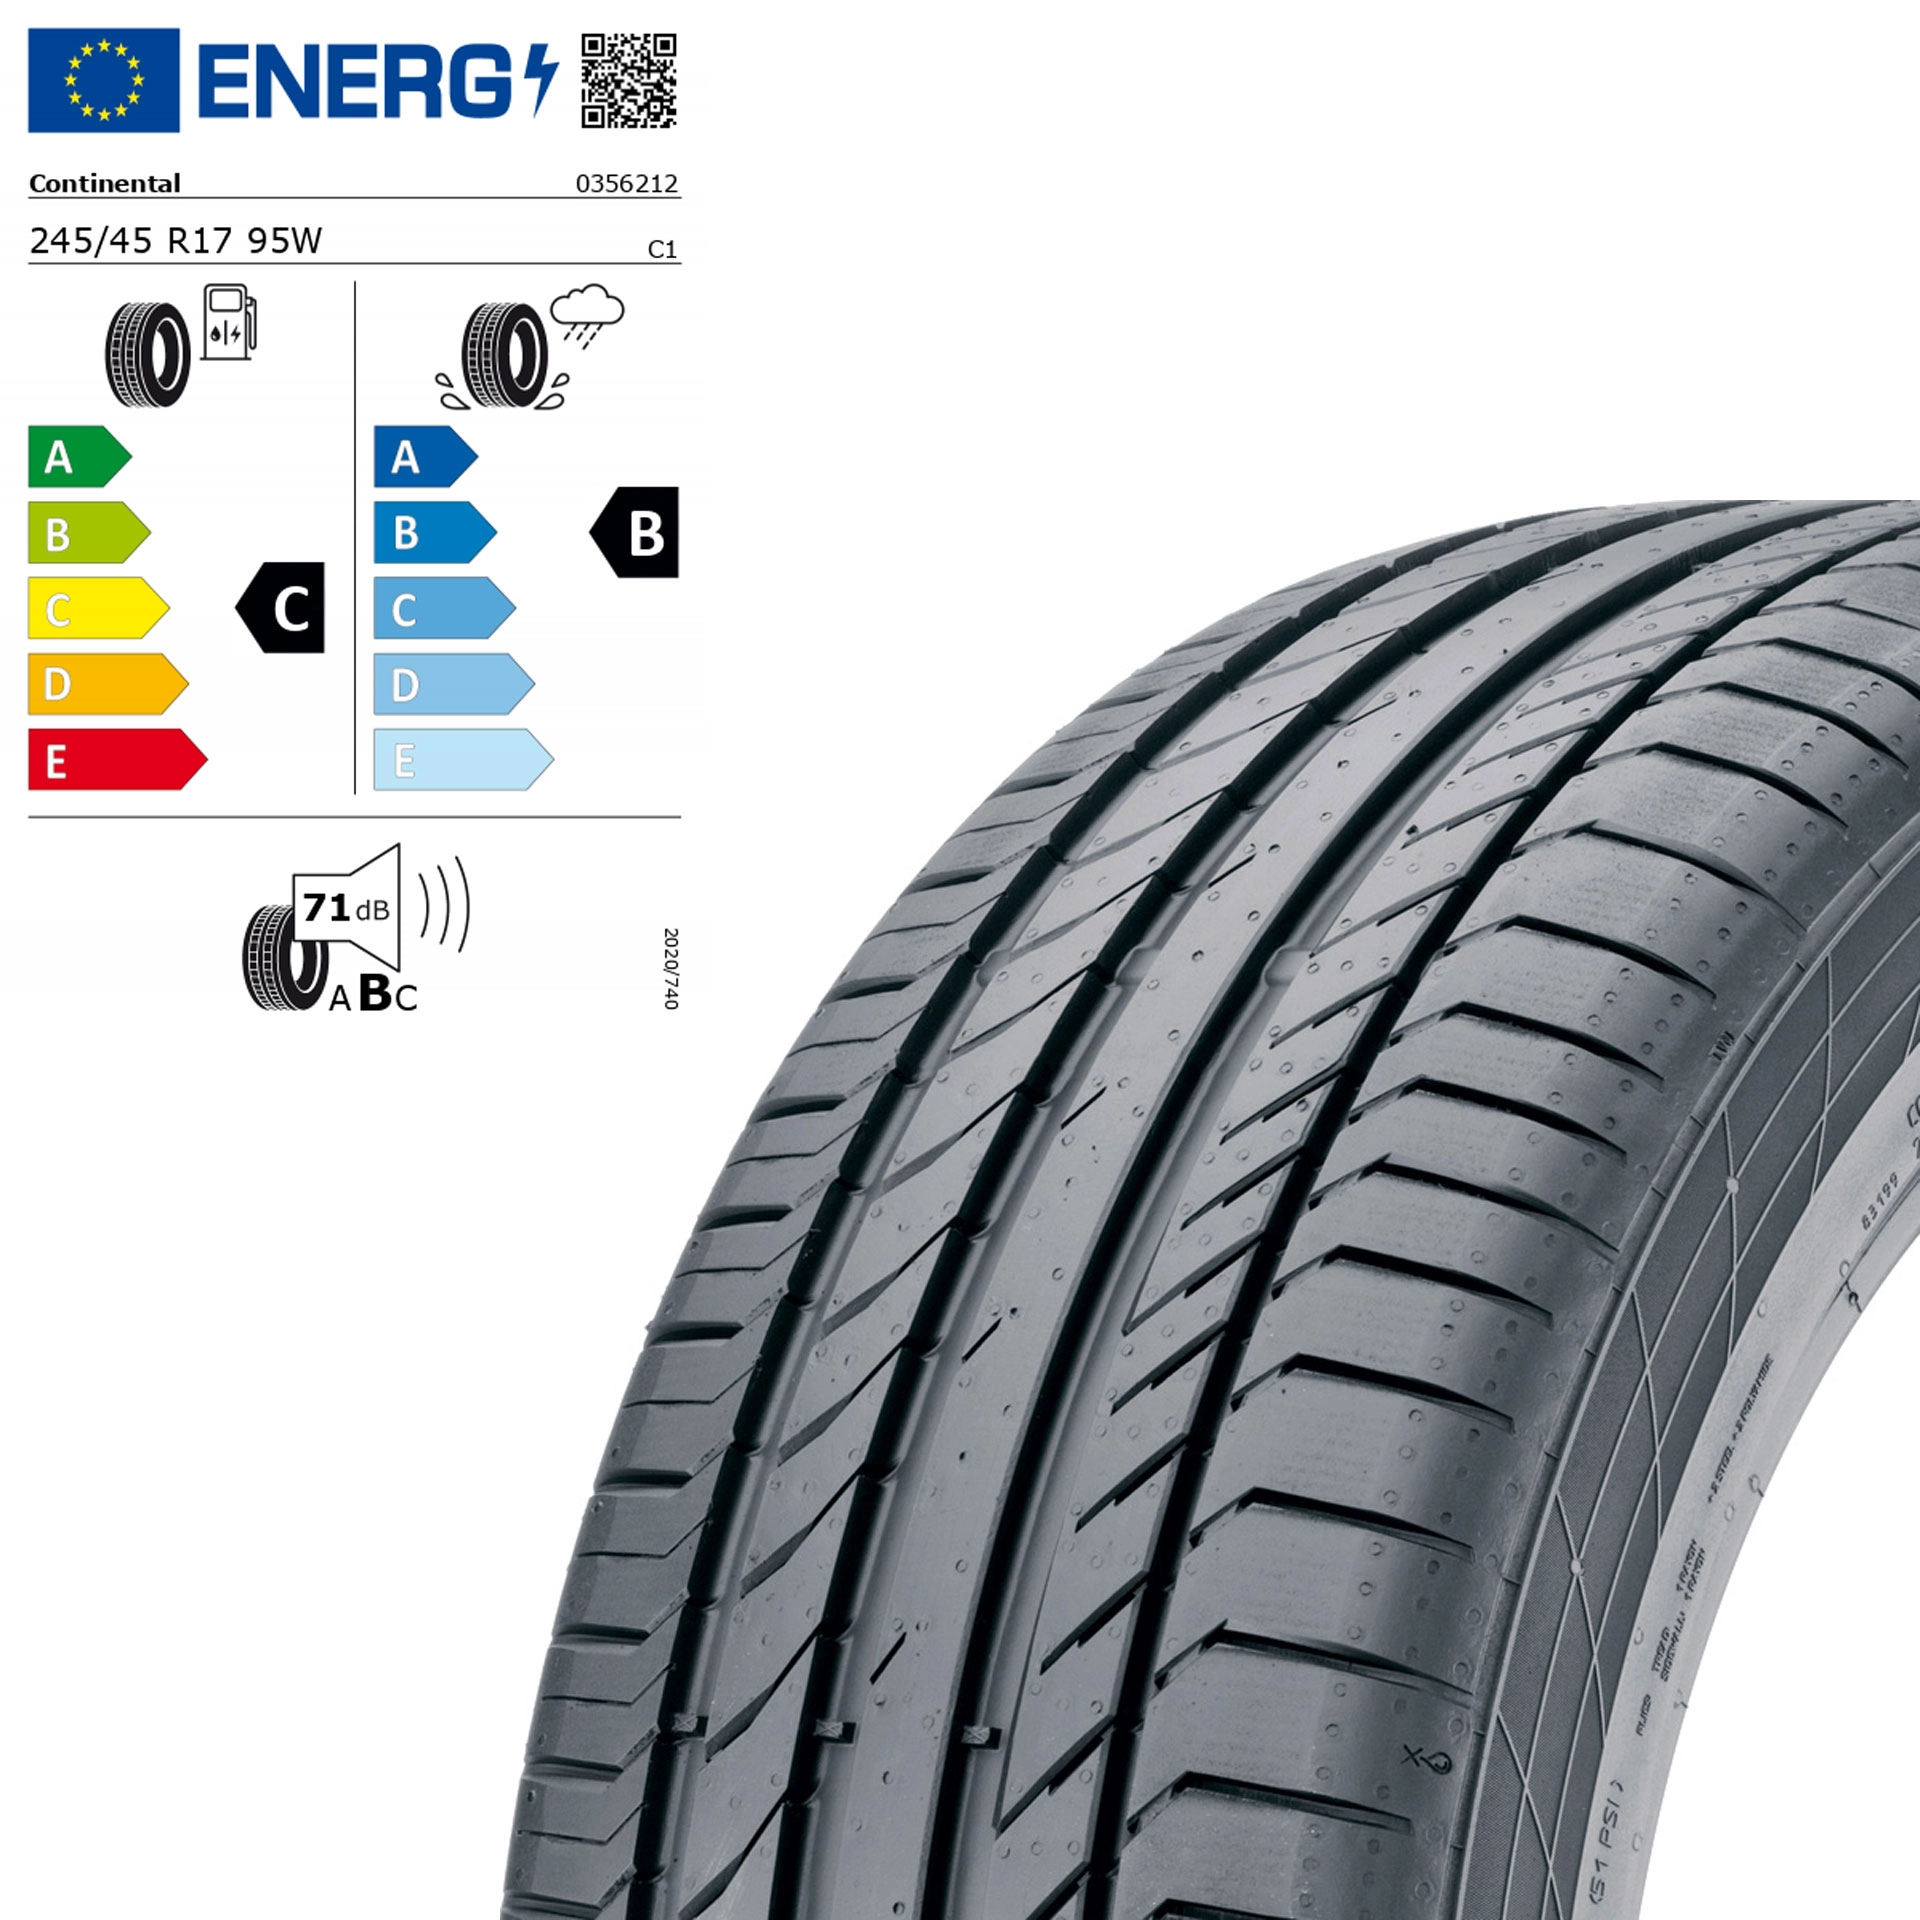 245/45 R17 95W Continental ContiSportContact 5 MO Sommerreifen Q44001111174